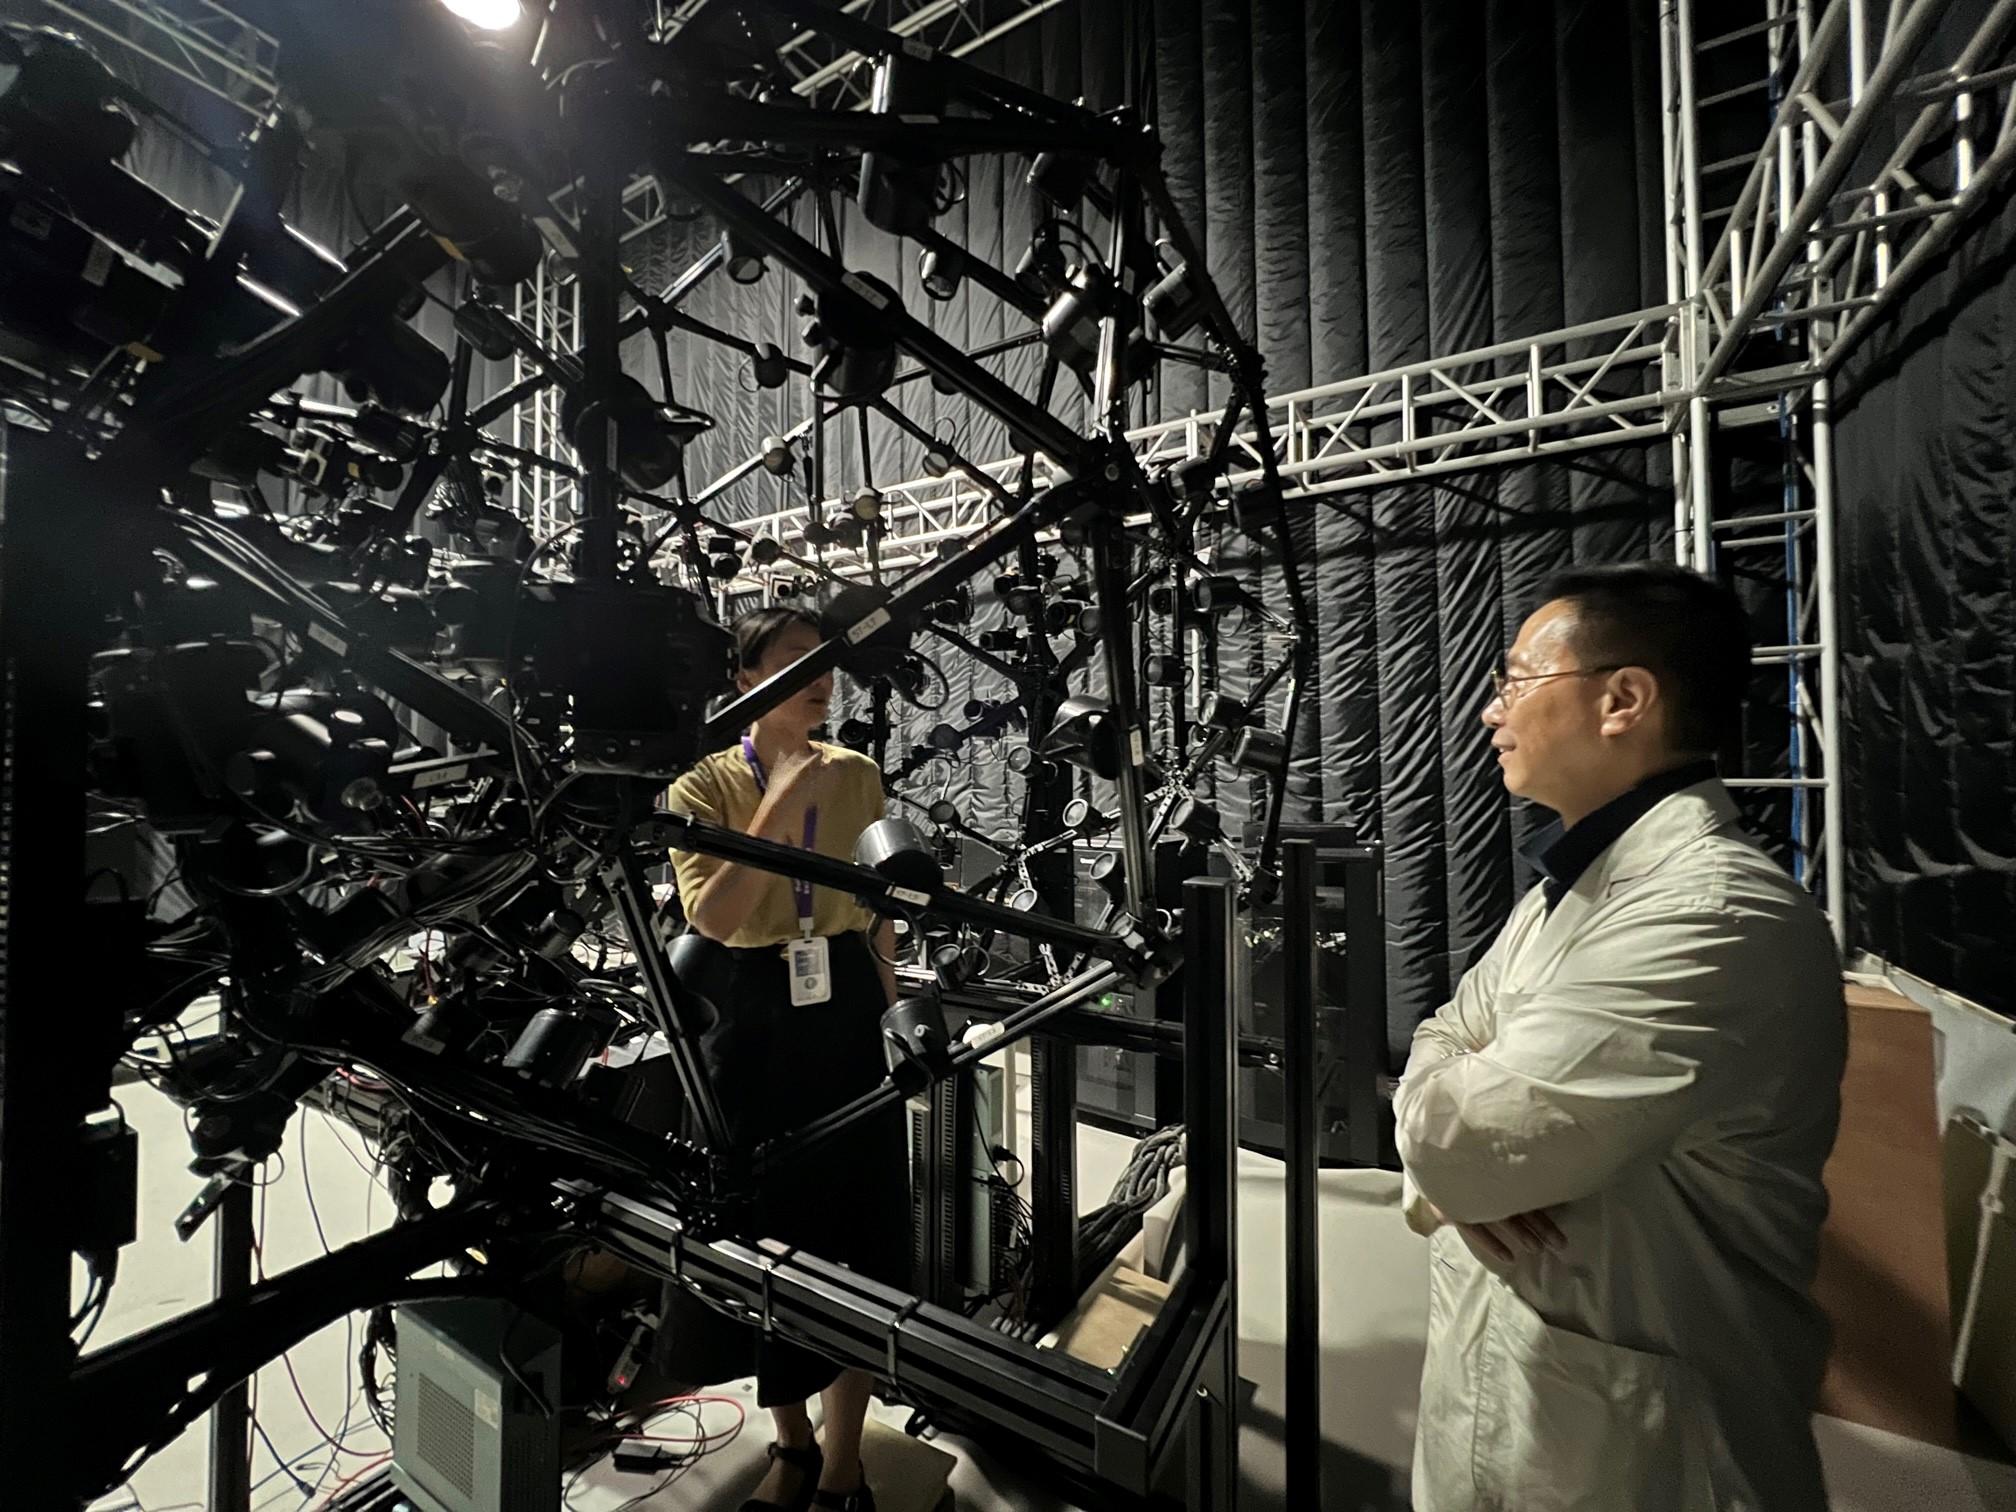 The Secretary for Culture, Sports and Tourism, Mr Kevin Yeung (right), today (August 2) visits Versatile Media, an integrated media company in Hangzhou which specialises in advertising and film production, to learn about the company's production techniques and three-dimensional camera scanning with 72 lenses.